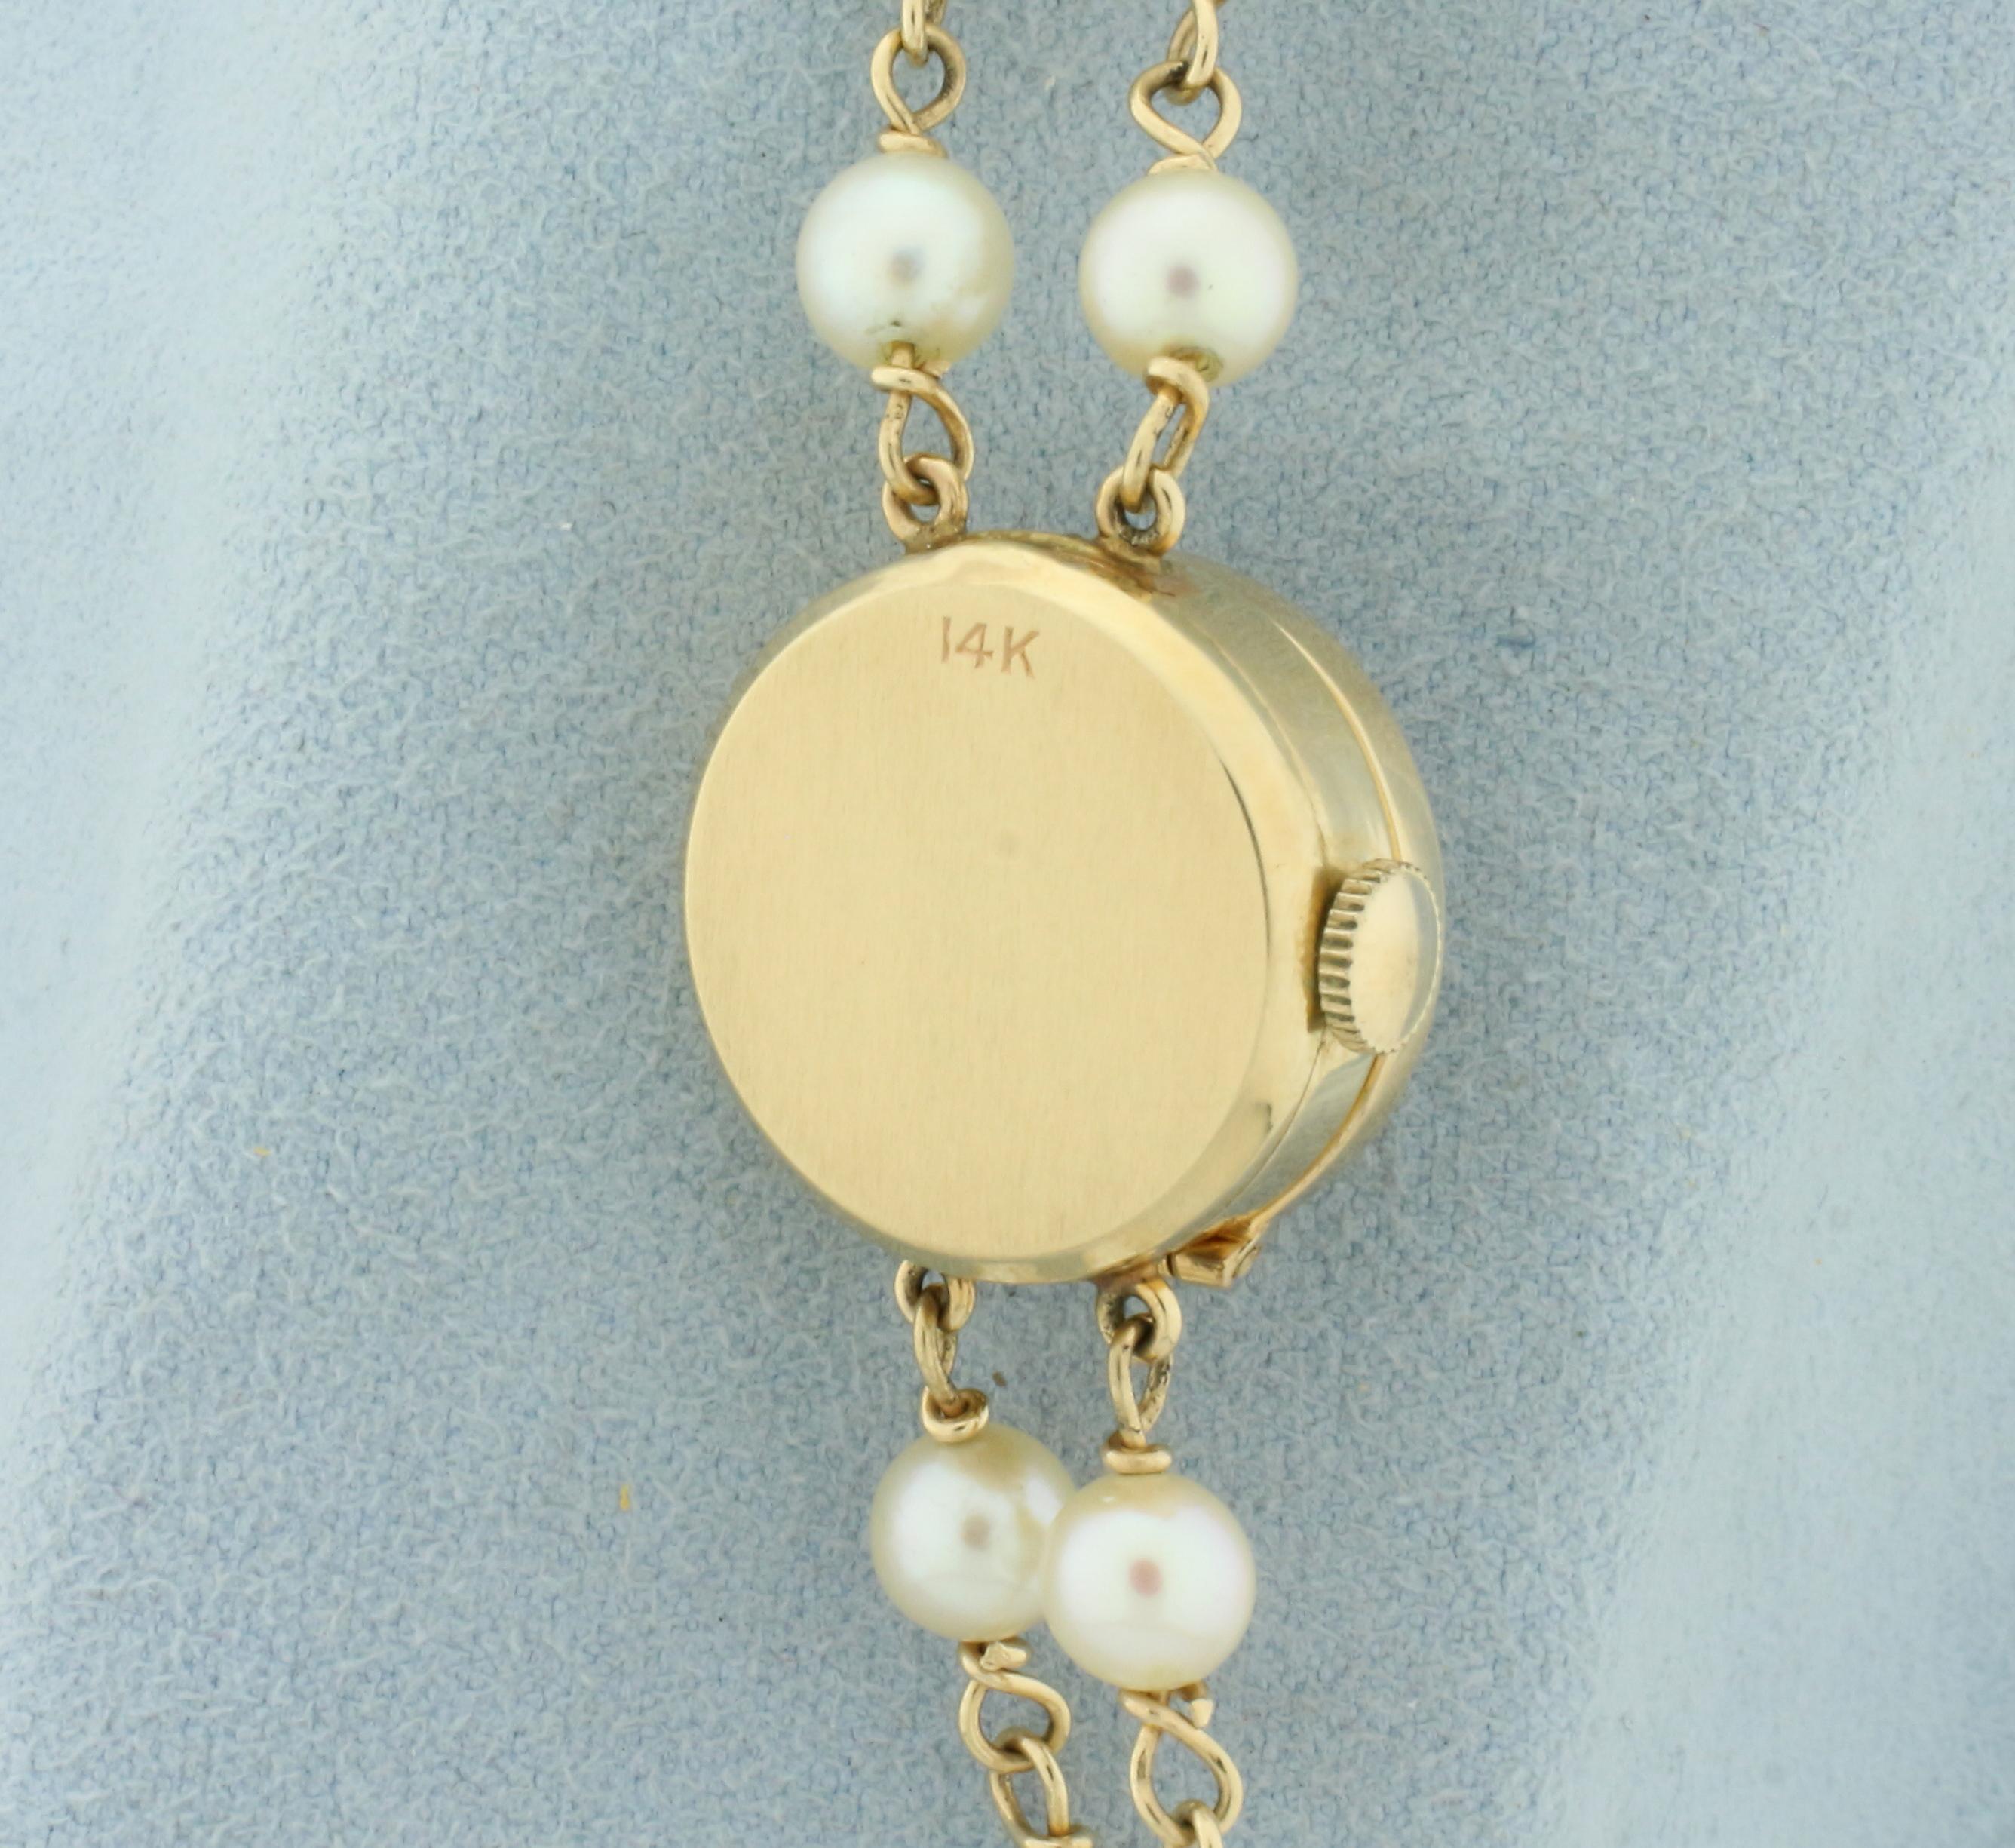 Vintage Honora Akoya Cultured Pearl Concealed Watch In 14k Yellow Gold